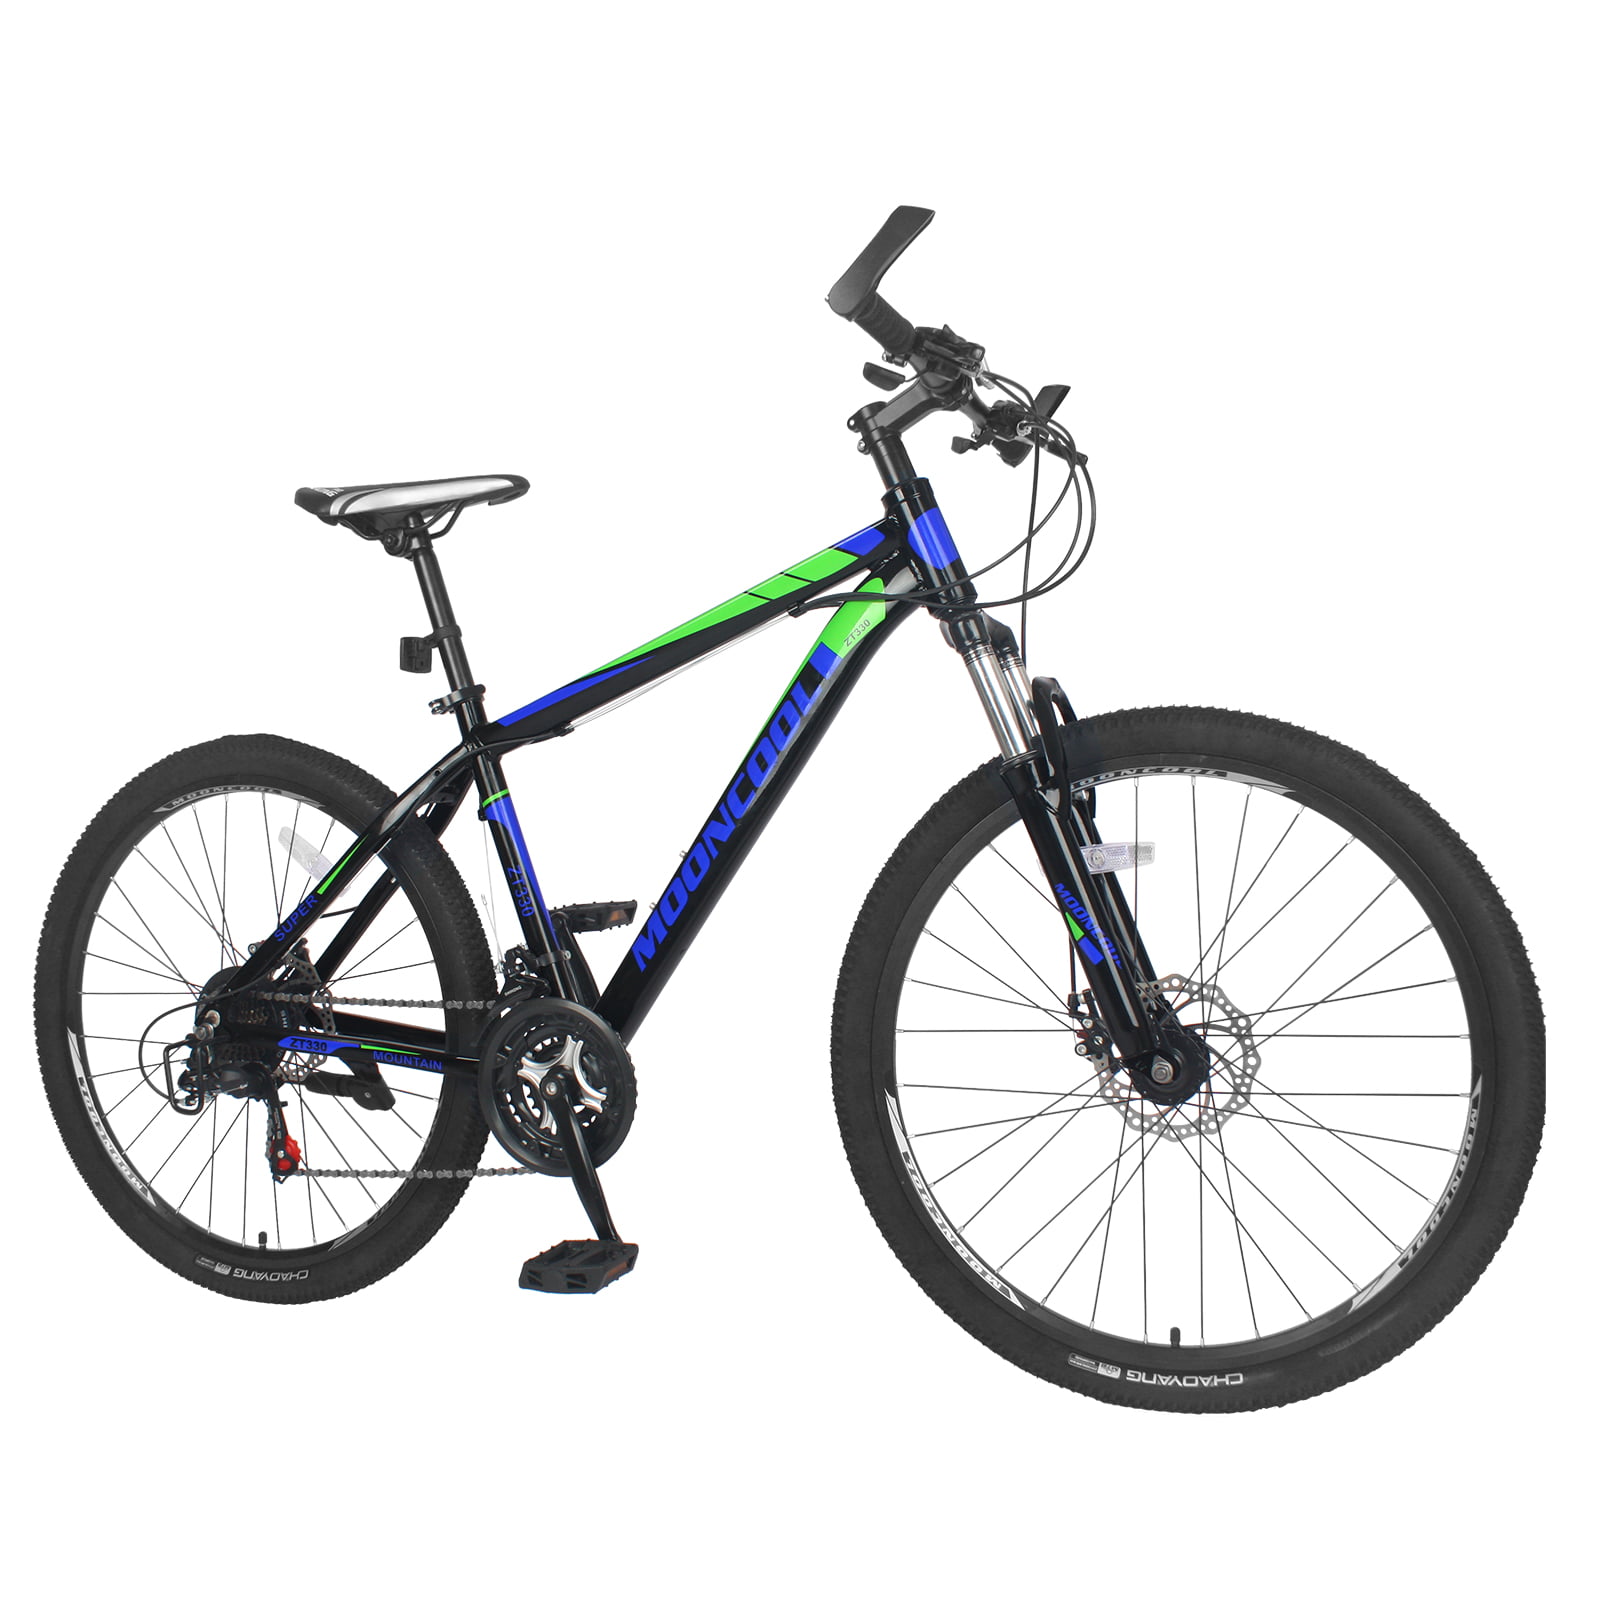 Details about   26" Folding Mountain Bike Shimano 21 Speed Bicycle Full suspension MTB School US 